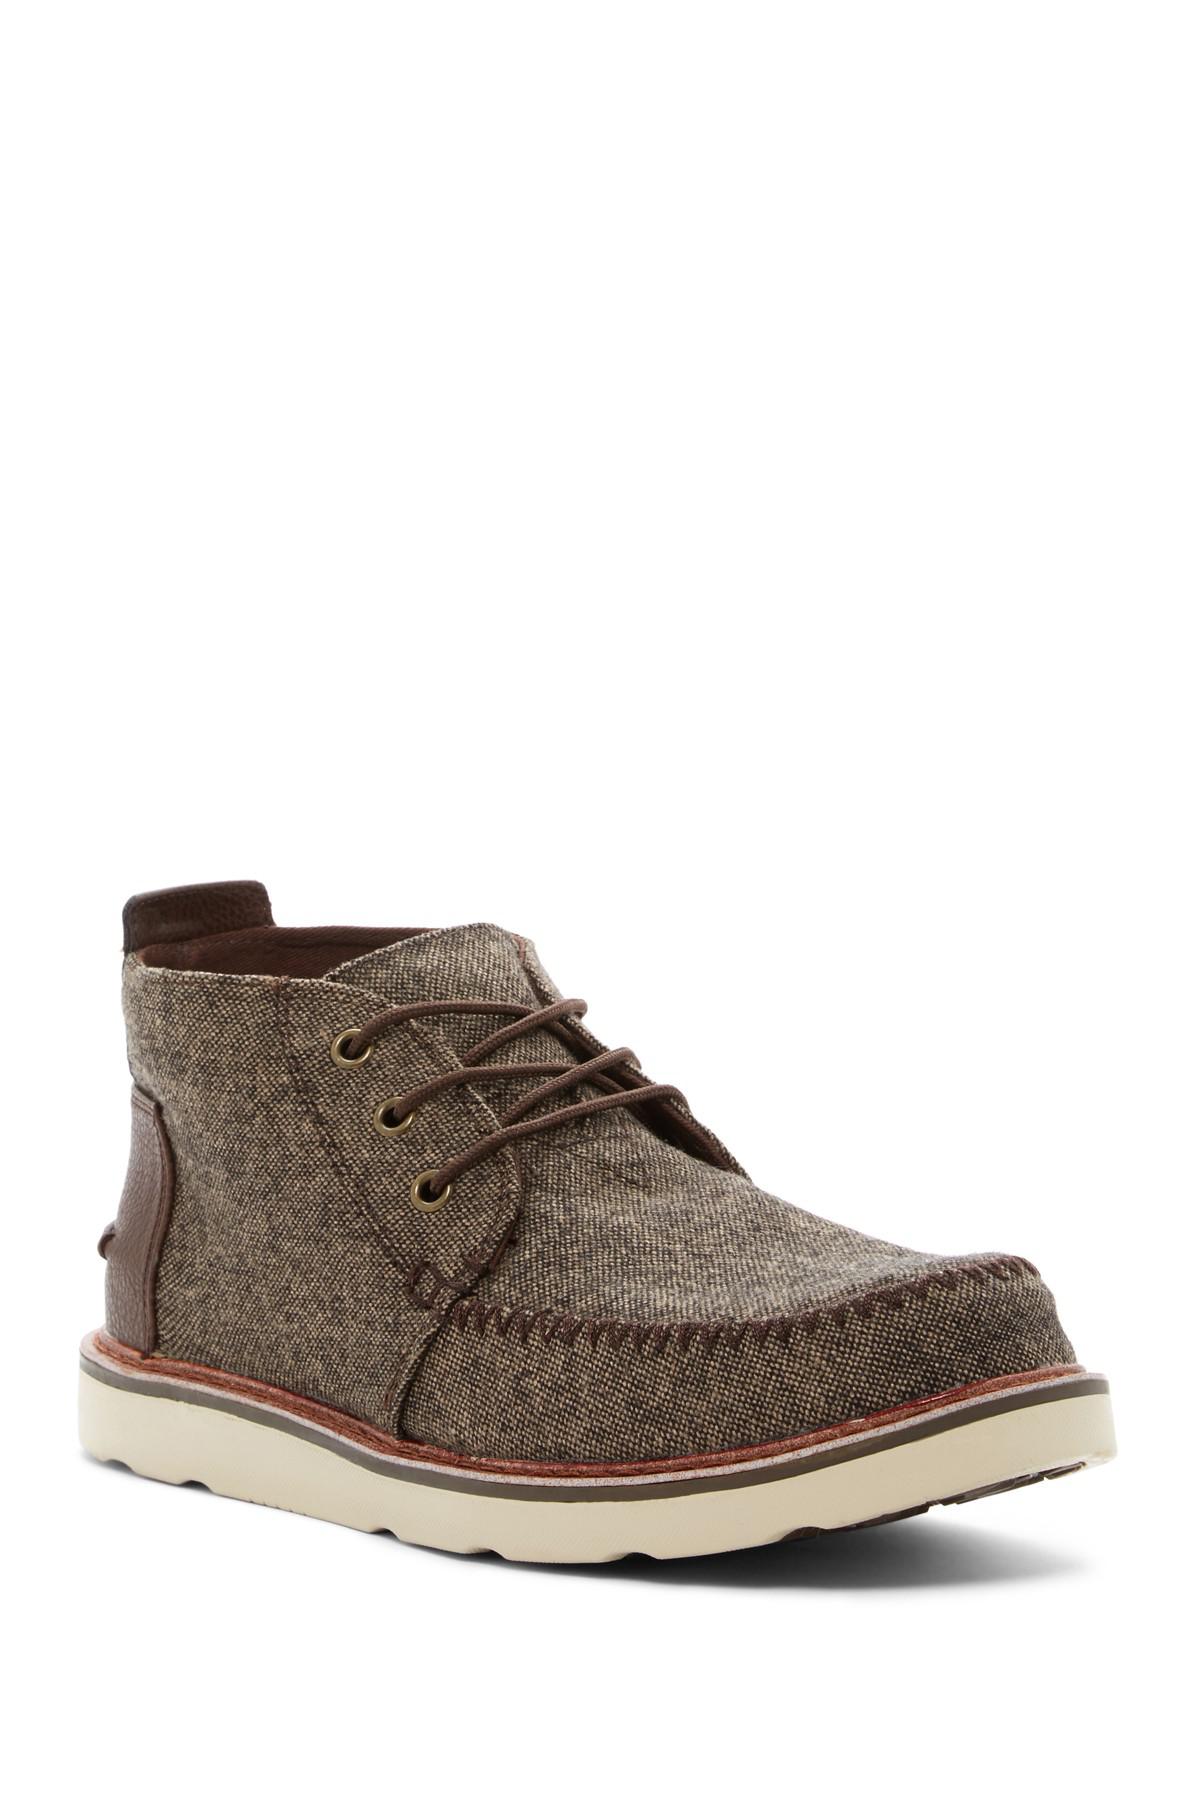 TOMS Brushed Wool Chukka Boot in Brown 